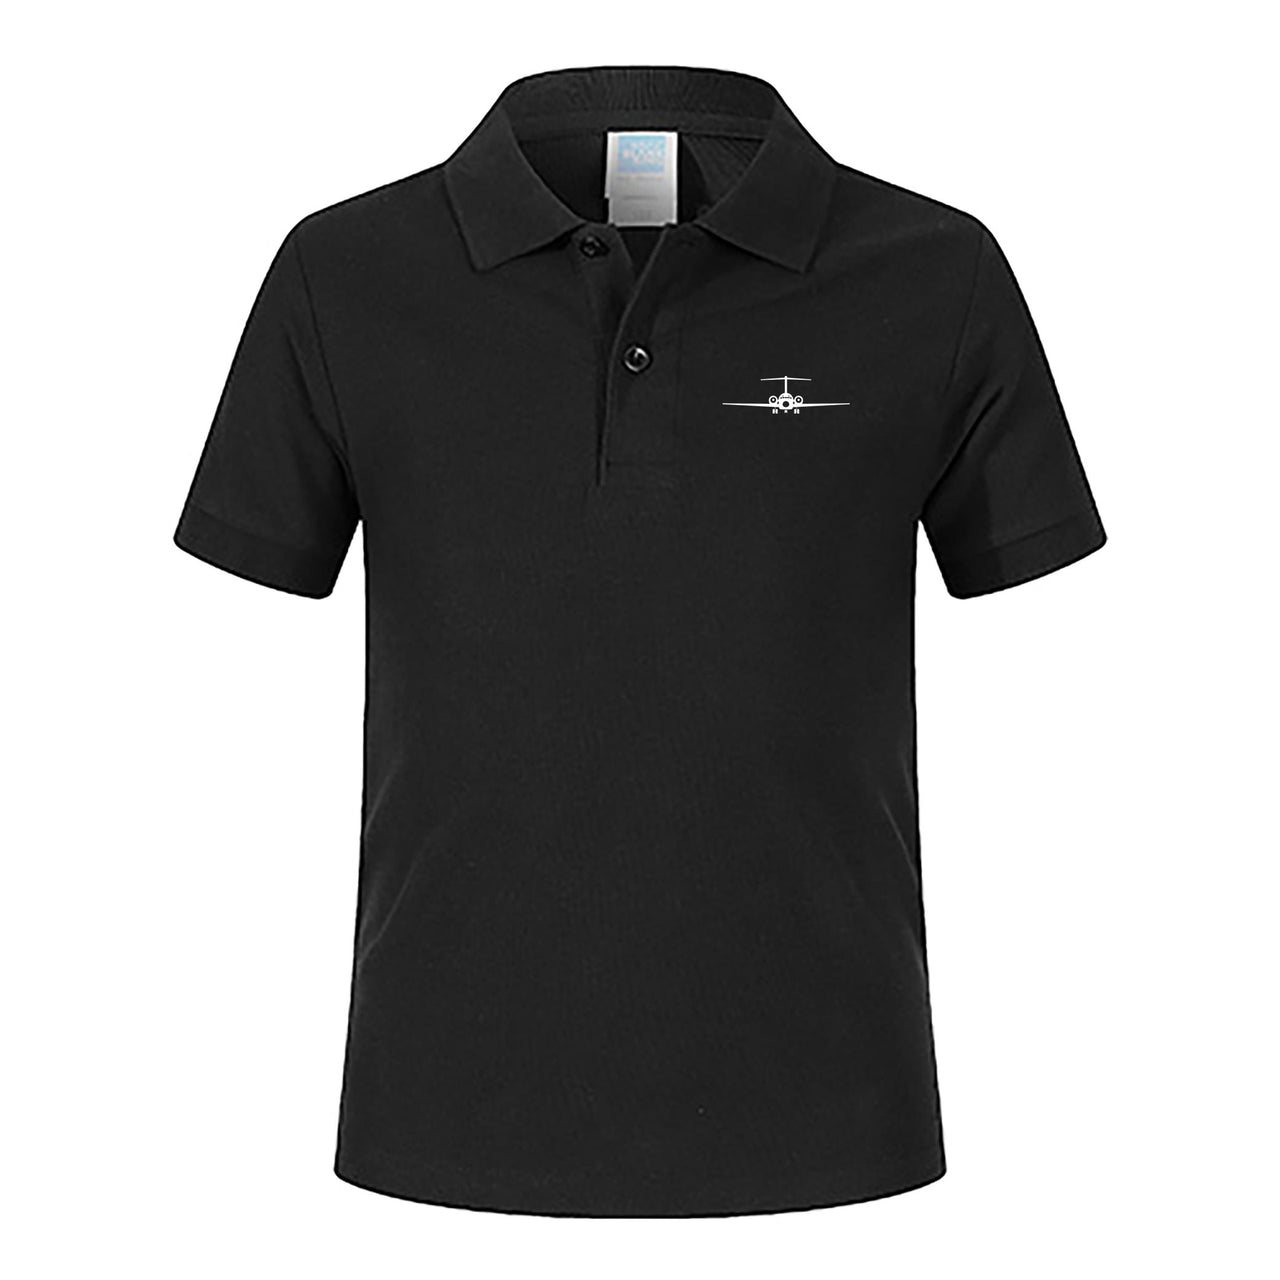 Boeing 717 Silhouette Designed Children Polo T-Shirts